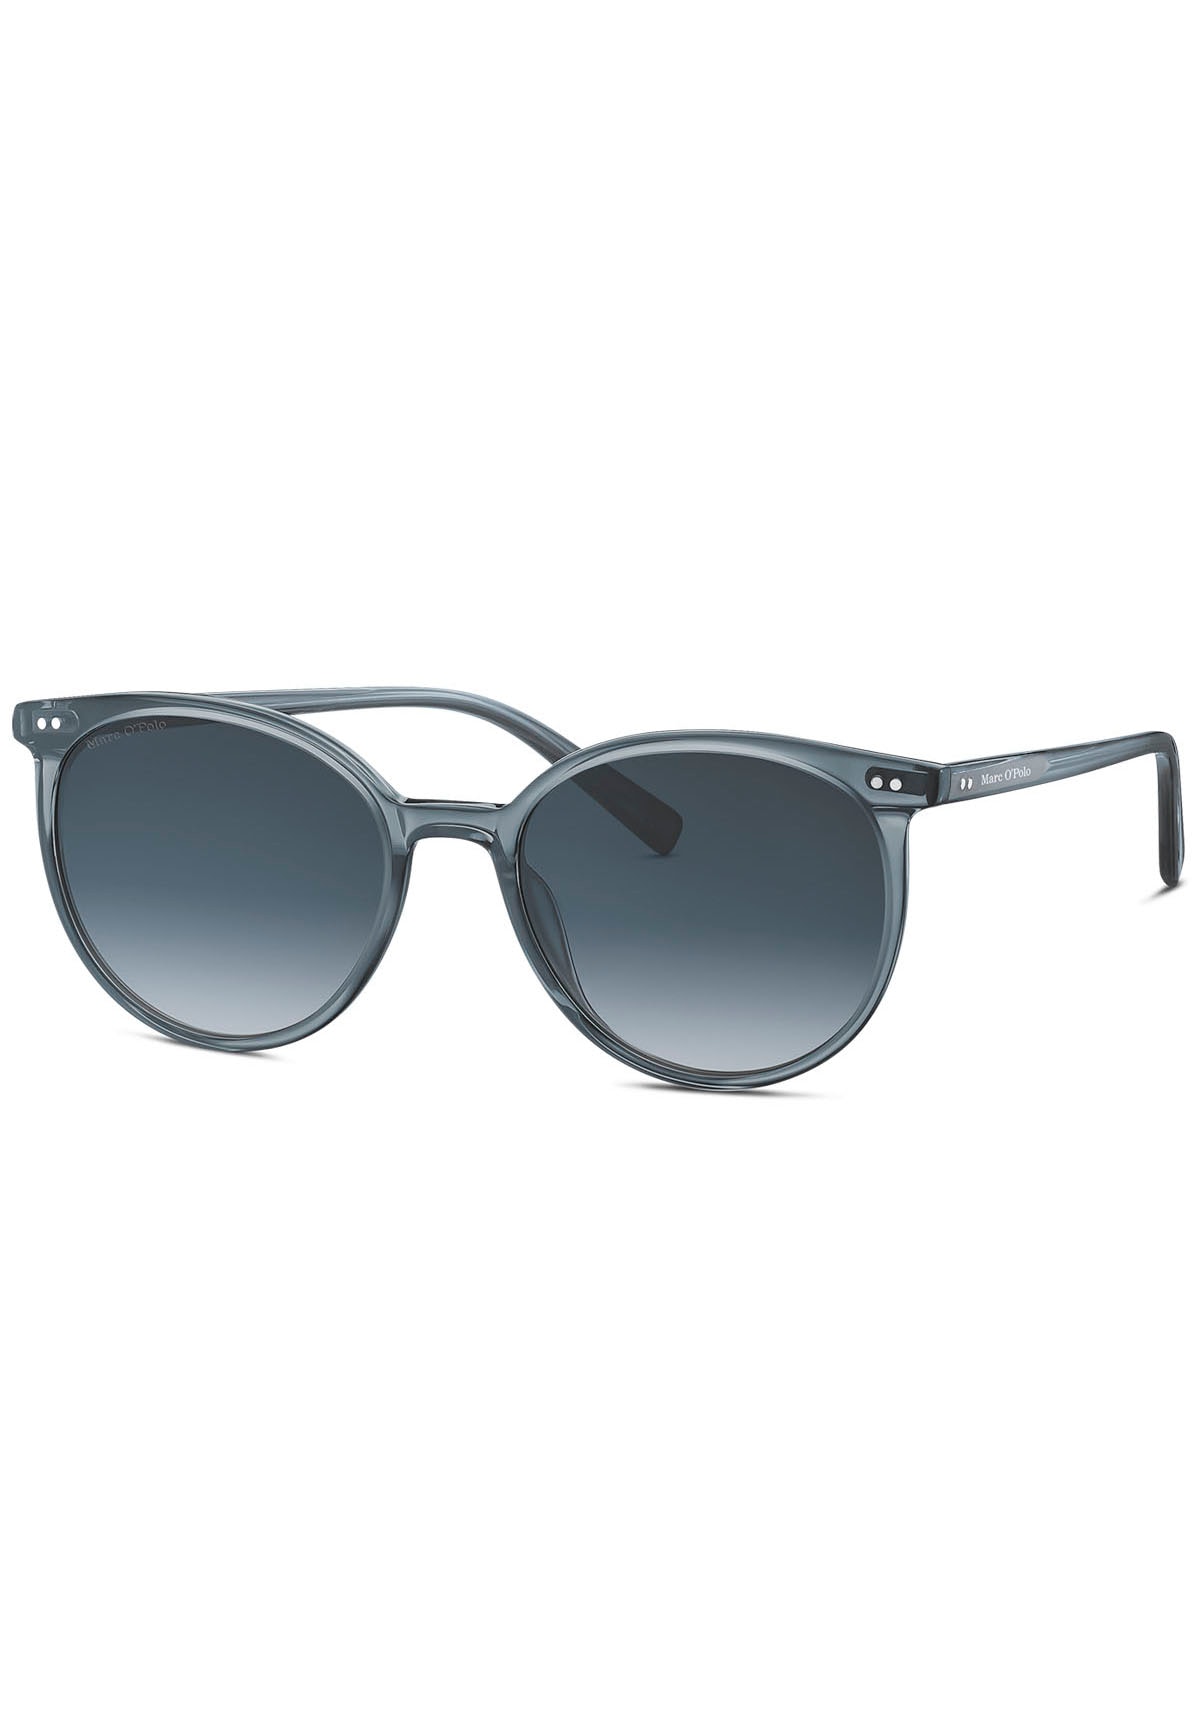 Marc O'Polo Sonnenbrille »Modell 506164«, Panto-Form online bei OTTO